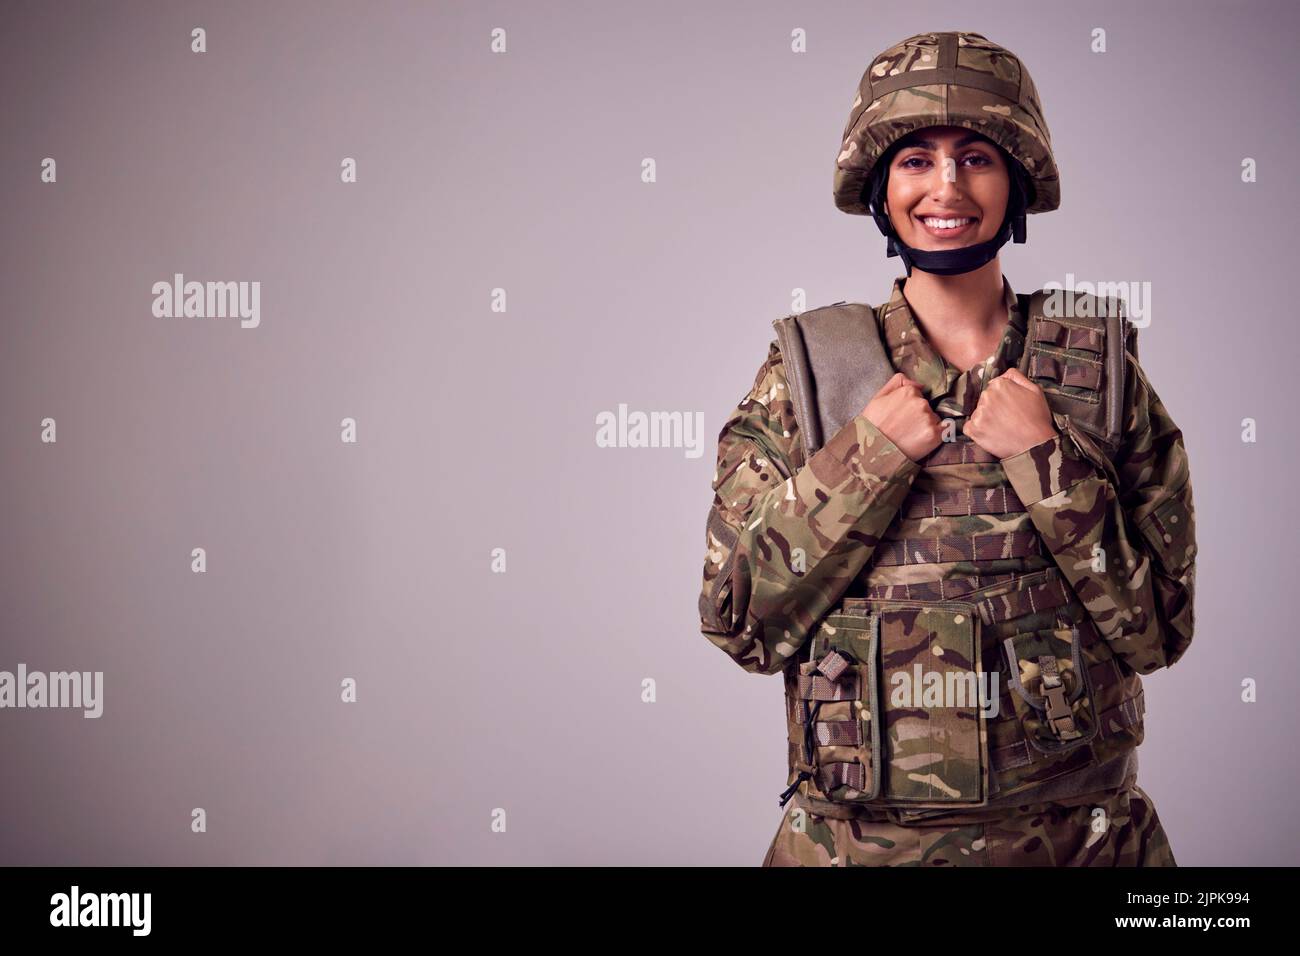 smiling, soldier, camouflage clothing, berufsporträt, smile, soldiers, troops Stock Photo